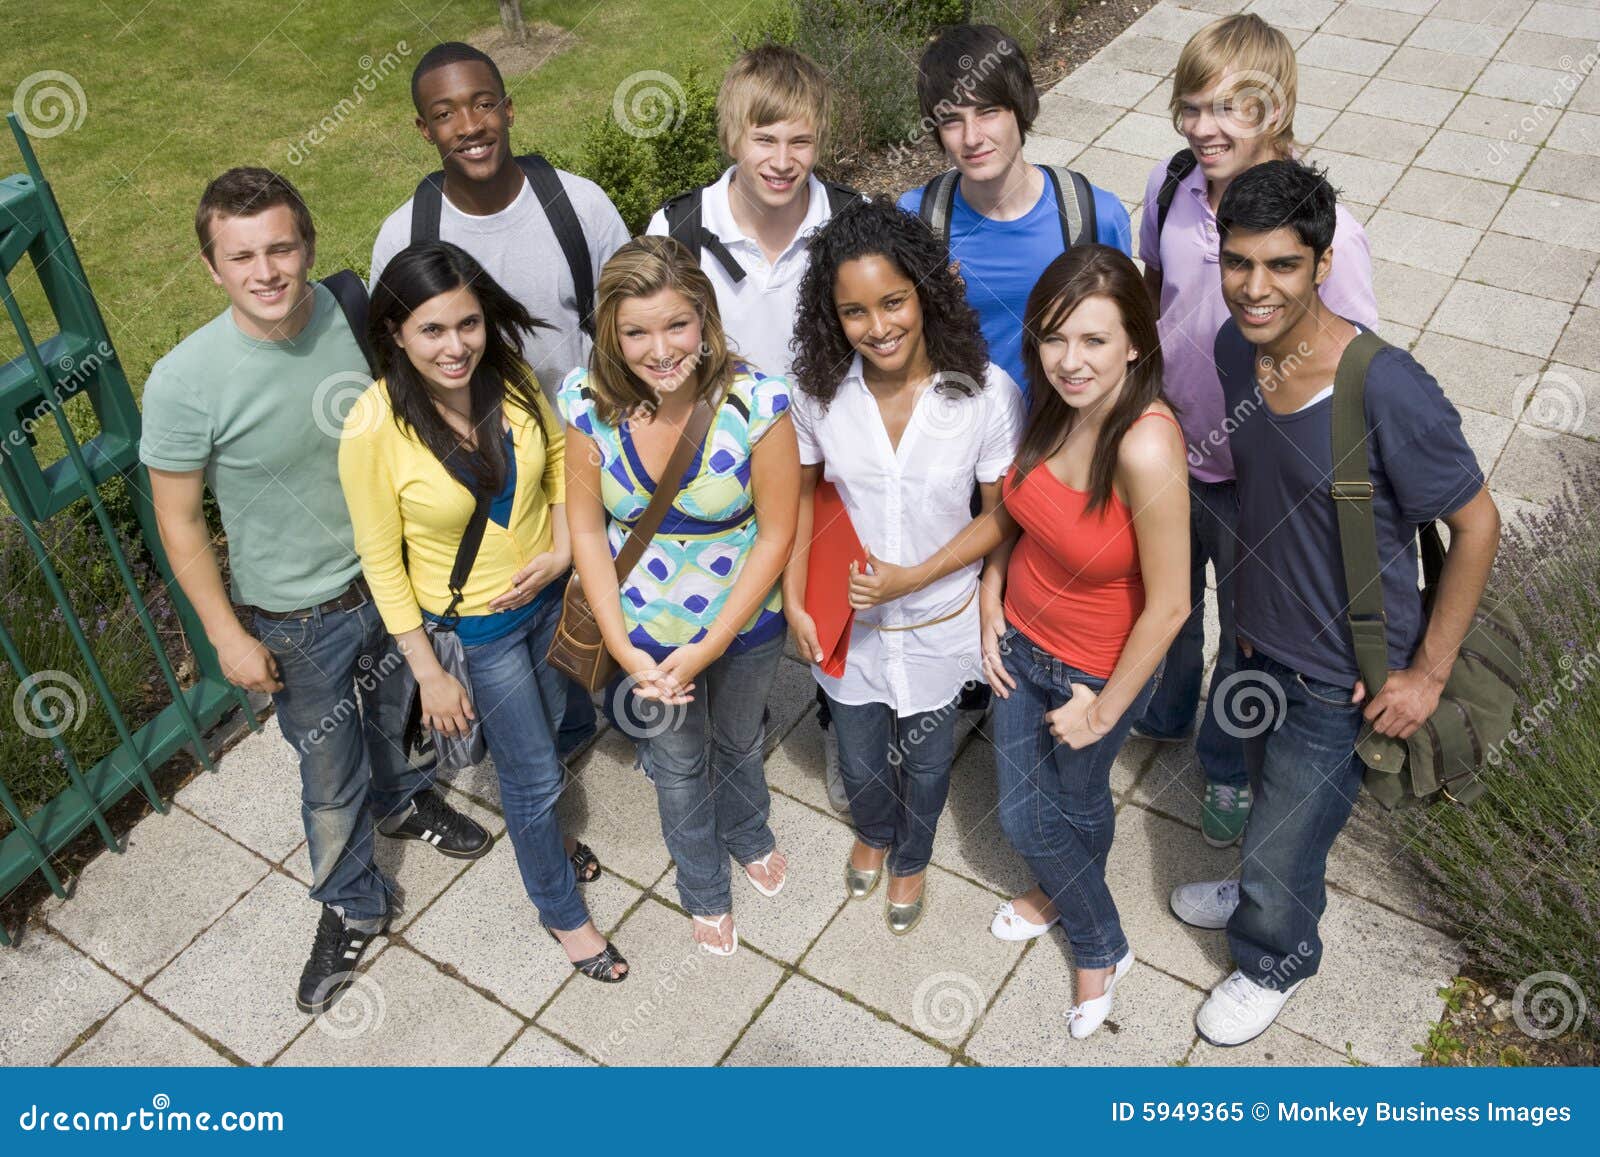 group of college students on campus